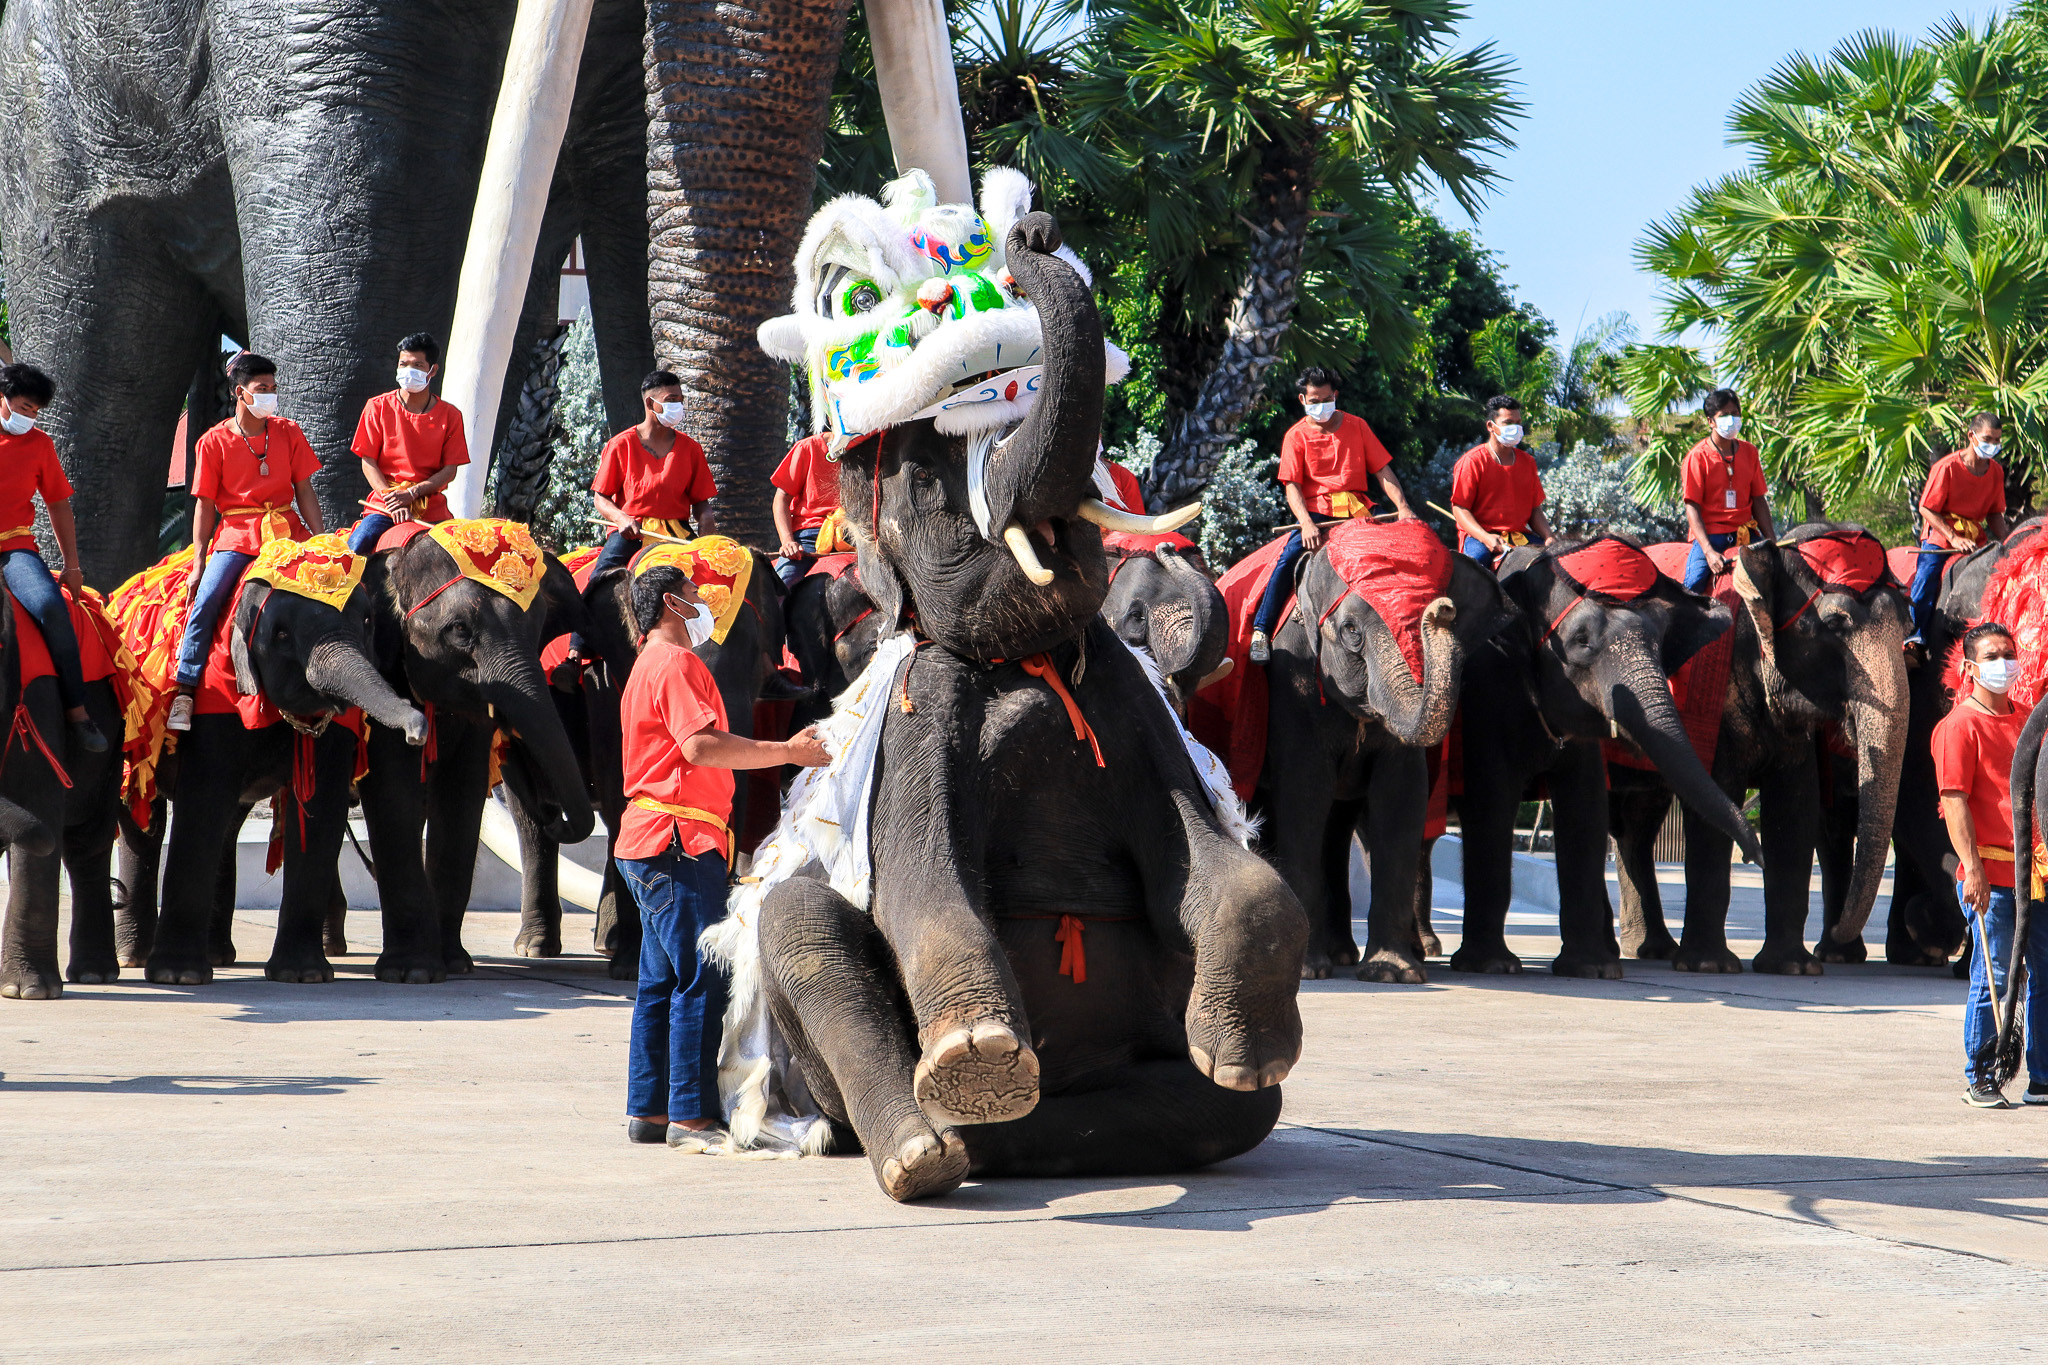 Welcoming the Chinese New Year with our elephant’s dragon dance to bring happiness for all tourists.